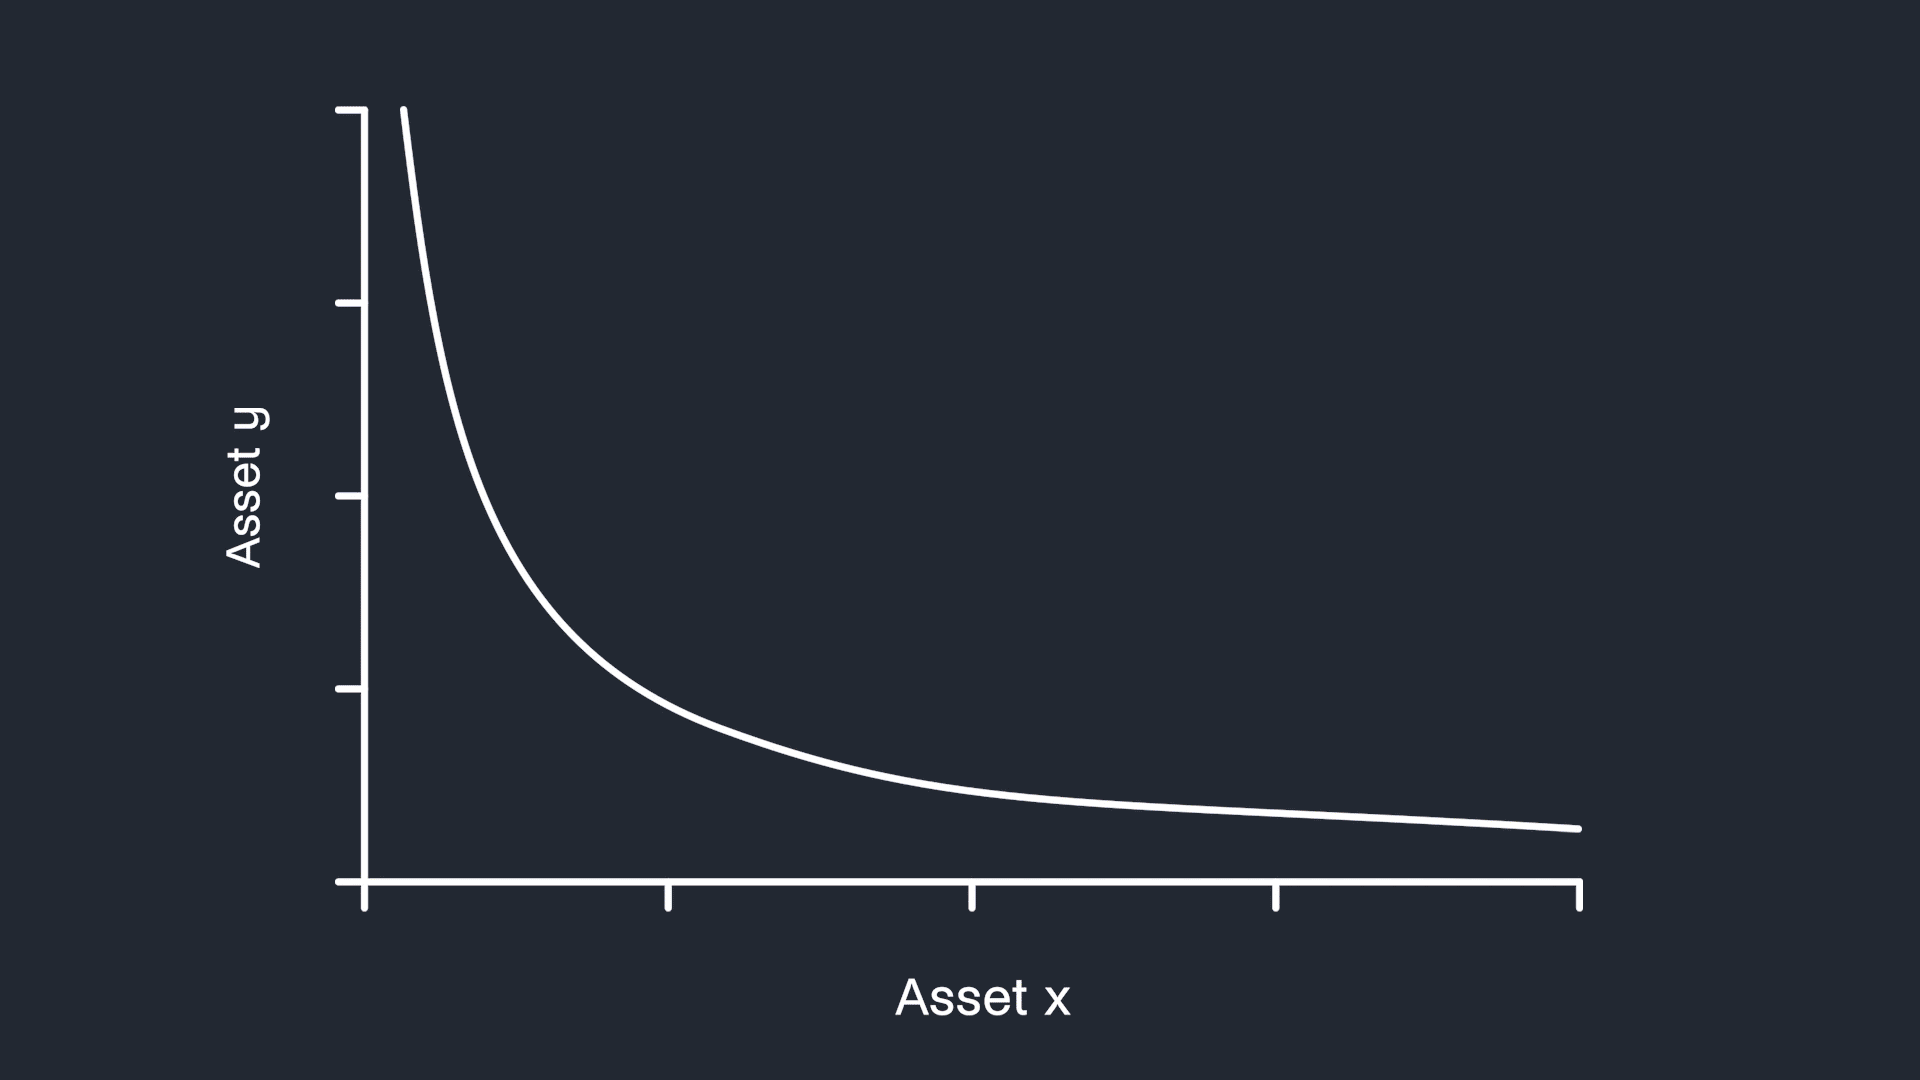 Introducing the first major part of Gyroscope: Concentrated Liquidity Pools